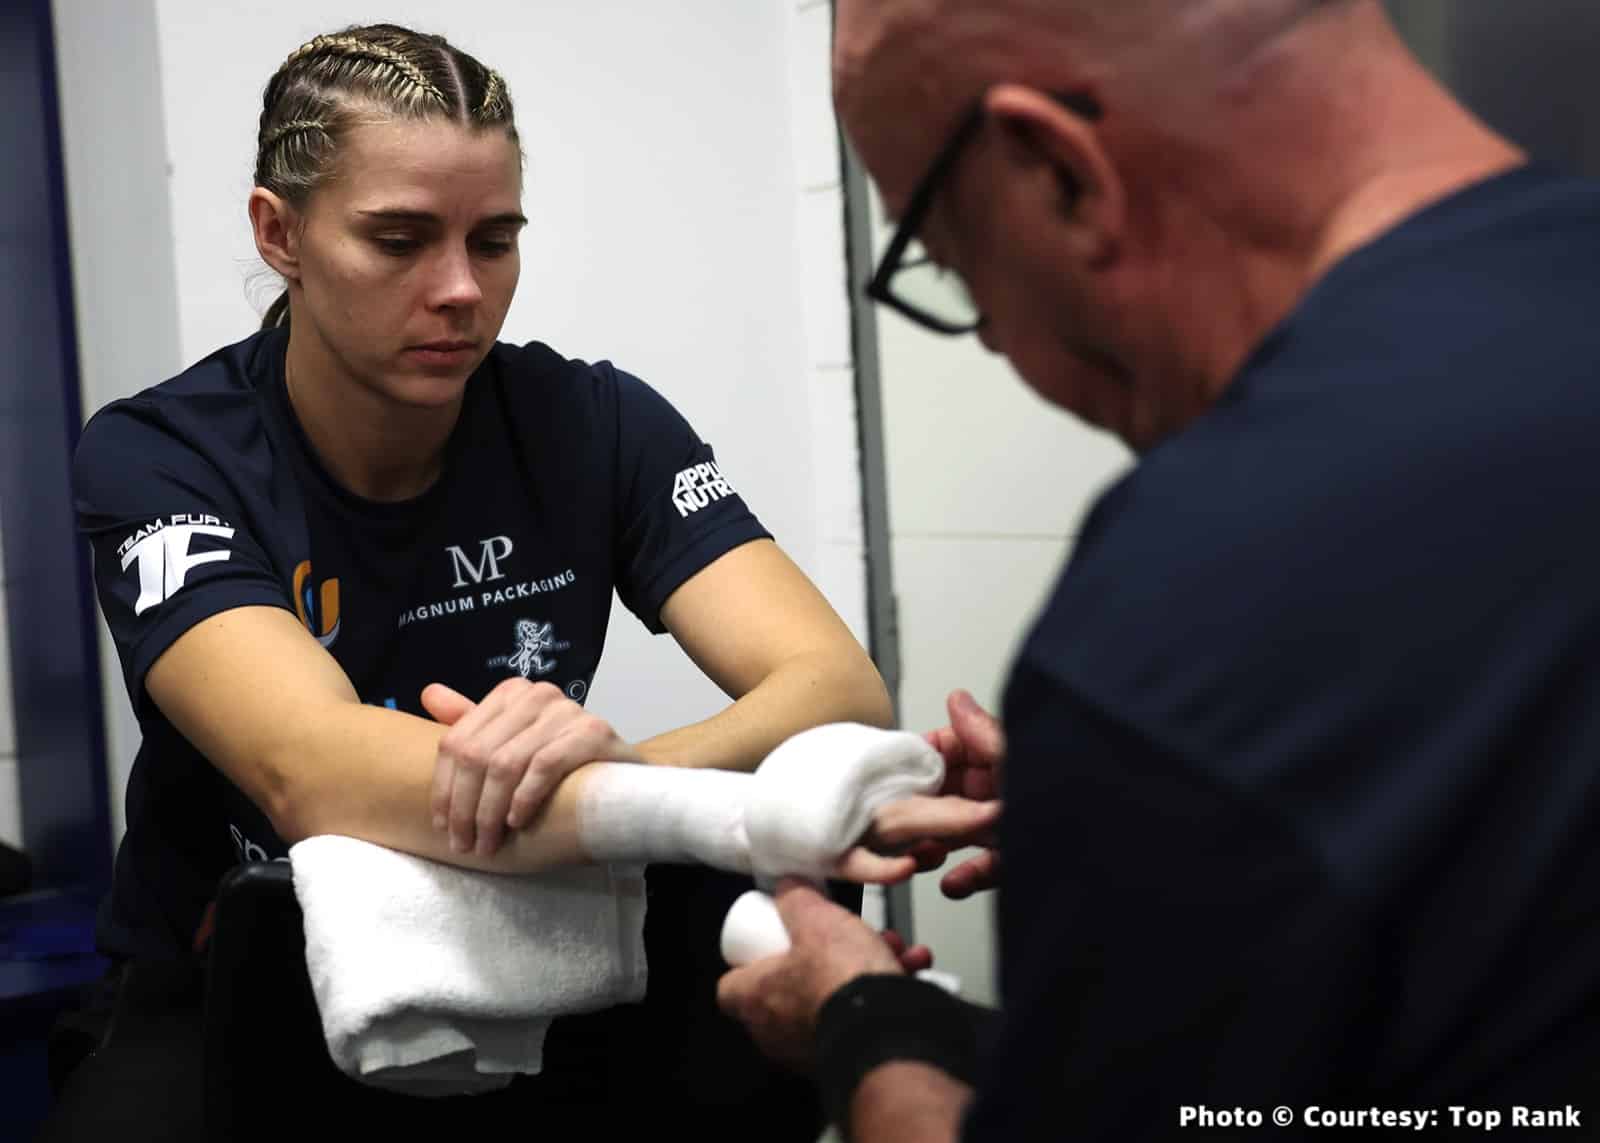 Savannah Marshall Says She Has “Activated Rematch Clause” For Claressa Shields Return